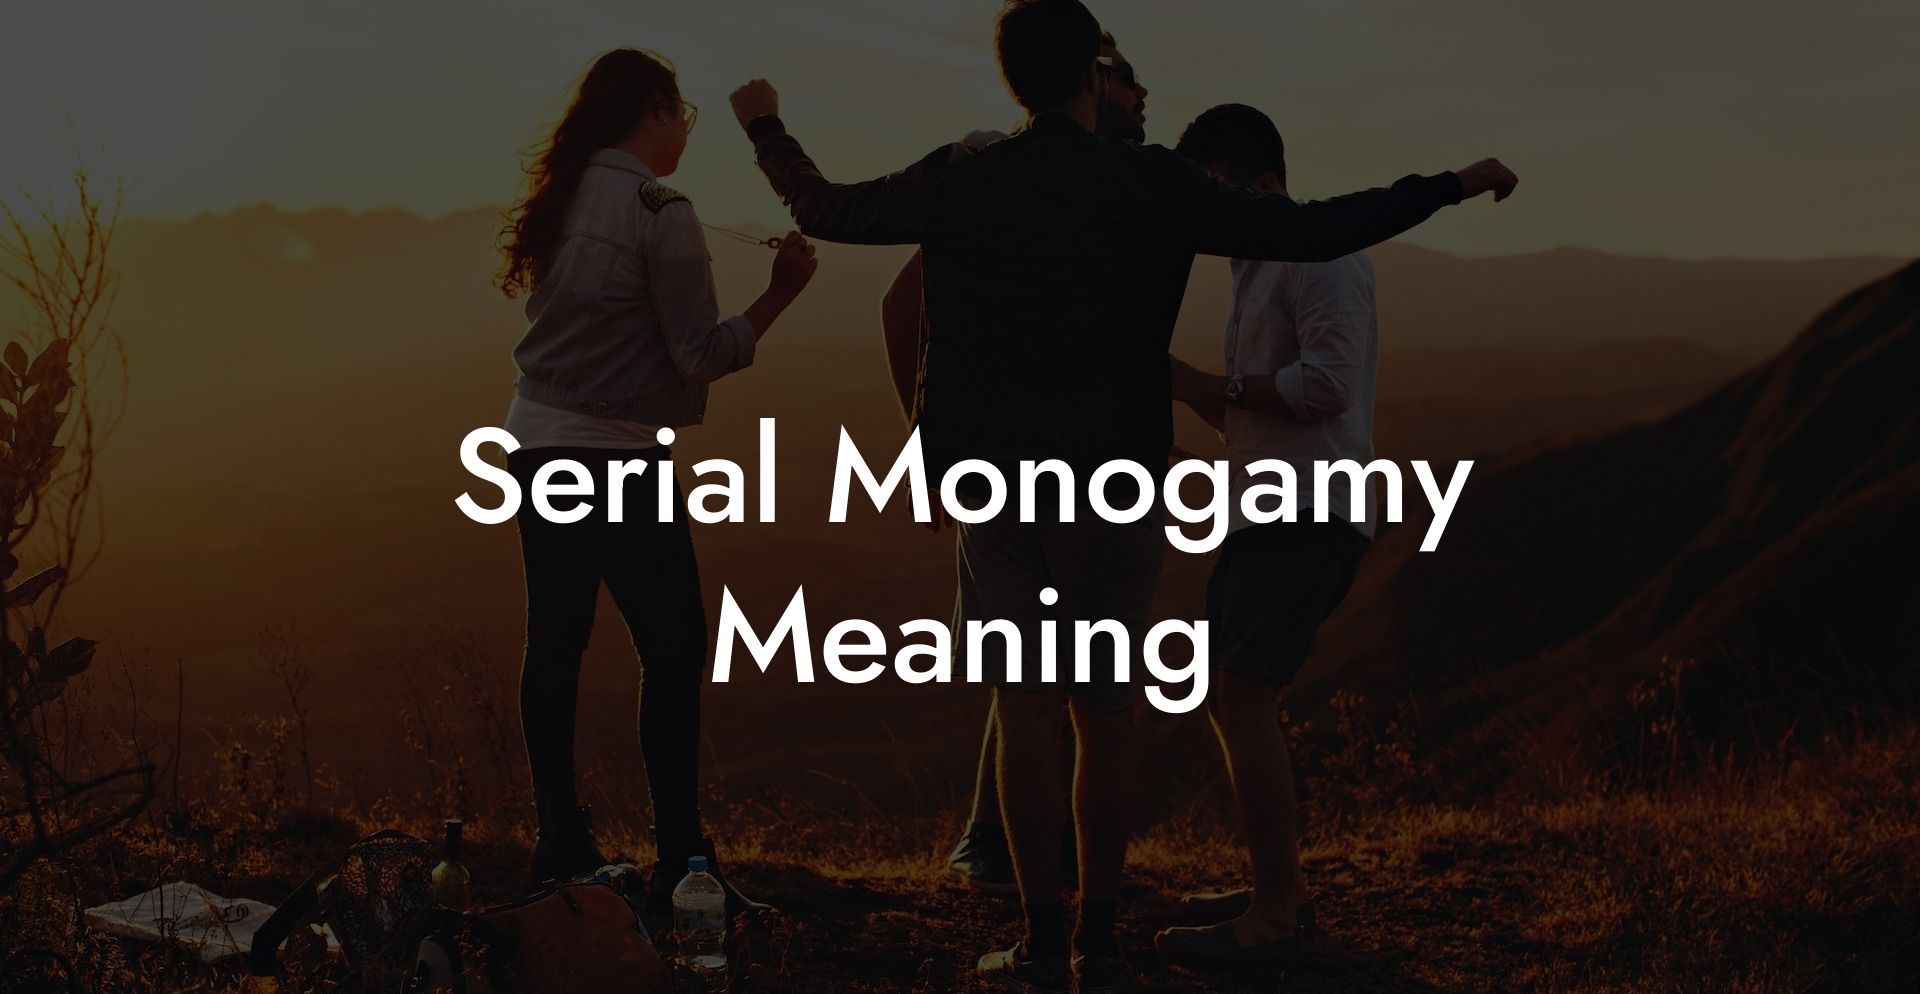 Serial Monogamy Meaning